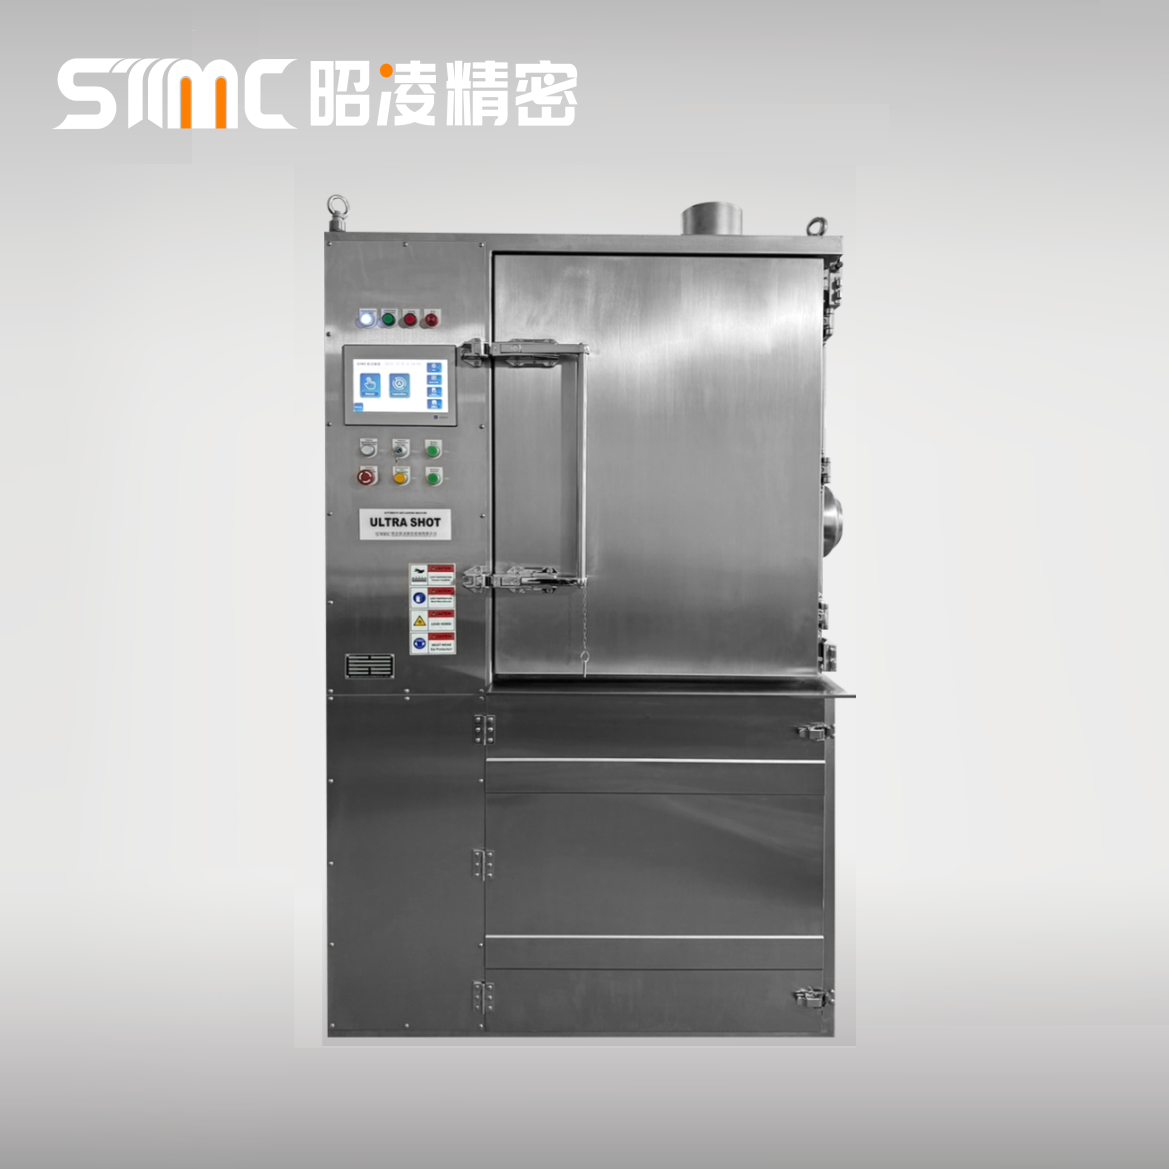 Ultra Shot NS-180T Cryogenic Deflashing/Deburring Machine for Rubber, Polyurethane, Silicone, Plastic, Die-casting and Metal Alloy Products